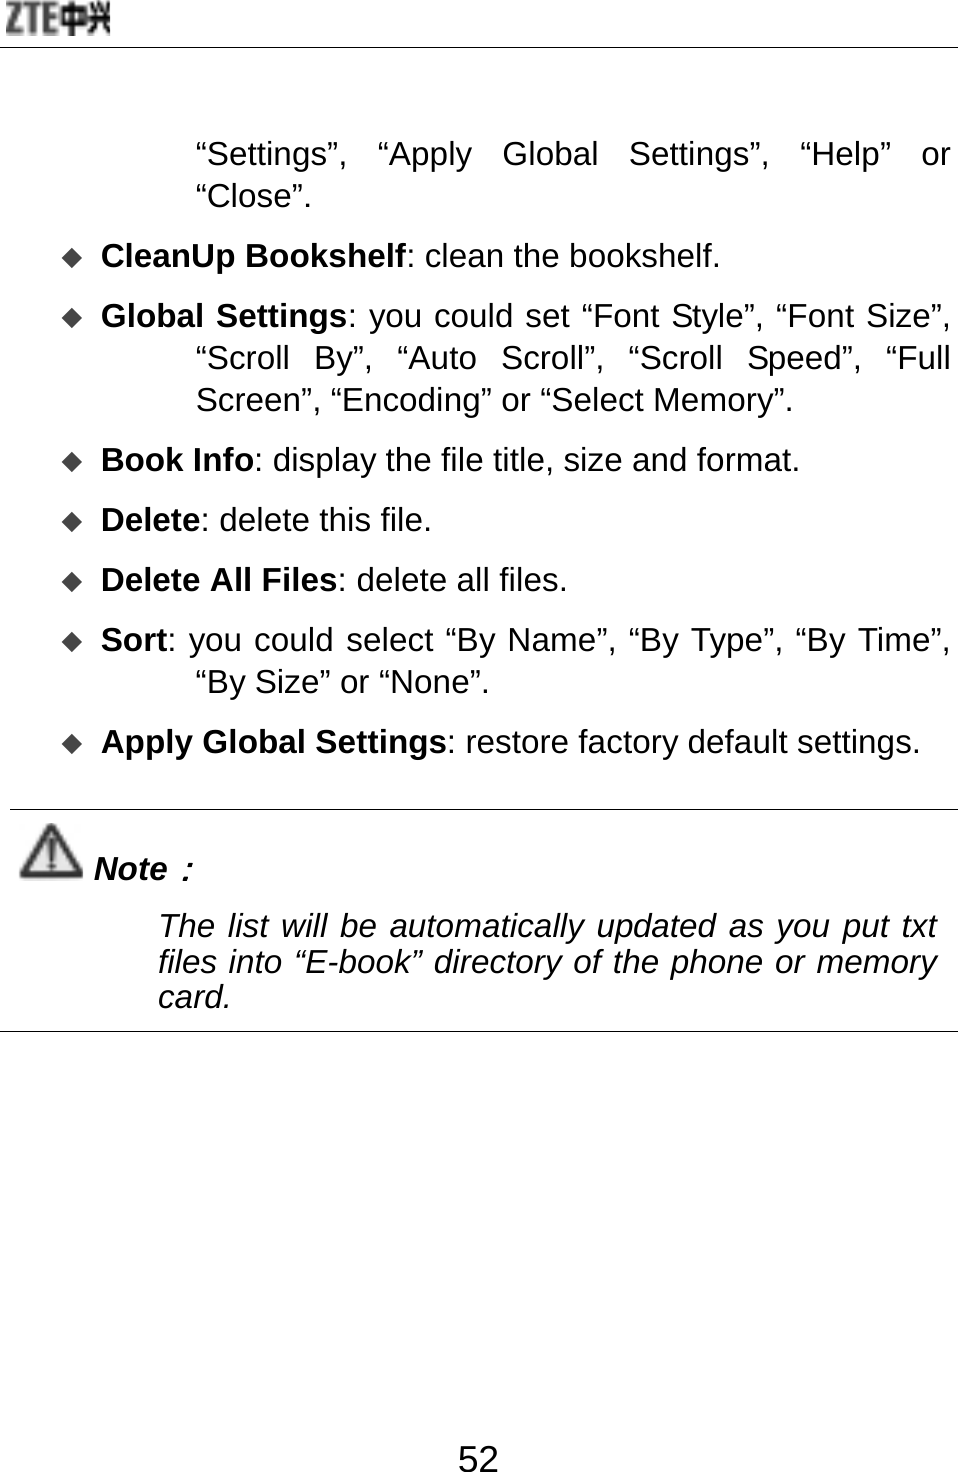  52 “Settings”, “Apply Global Settings”, “Help” or “Close”.  CleanUp Bookshelf: clean the bookshelf.  Global Settings: you could set “Font Style”, “Font Size”, “Scroll By”, “Auto Scroll”, “Scroll Speed”, “Full Screen”, “Encoding” or “Select Memory”.  Book Info: display the file title, size and format.  Delete: delete this file.  Delete All Files: delete all files.  Sort: you could select “By Name”, “By Type”, “By Time”, “By Size” or “None”.    Apply Global Settings: restore factory default settings.  Note： The list will be automatically updated as you put txt files into “E-book” directory of the phone or memory card.  